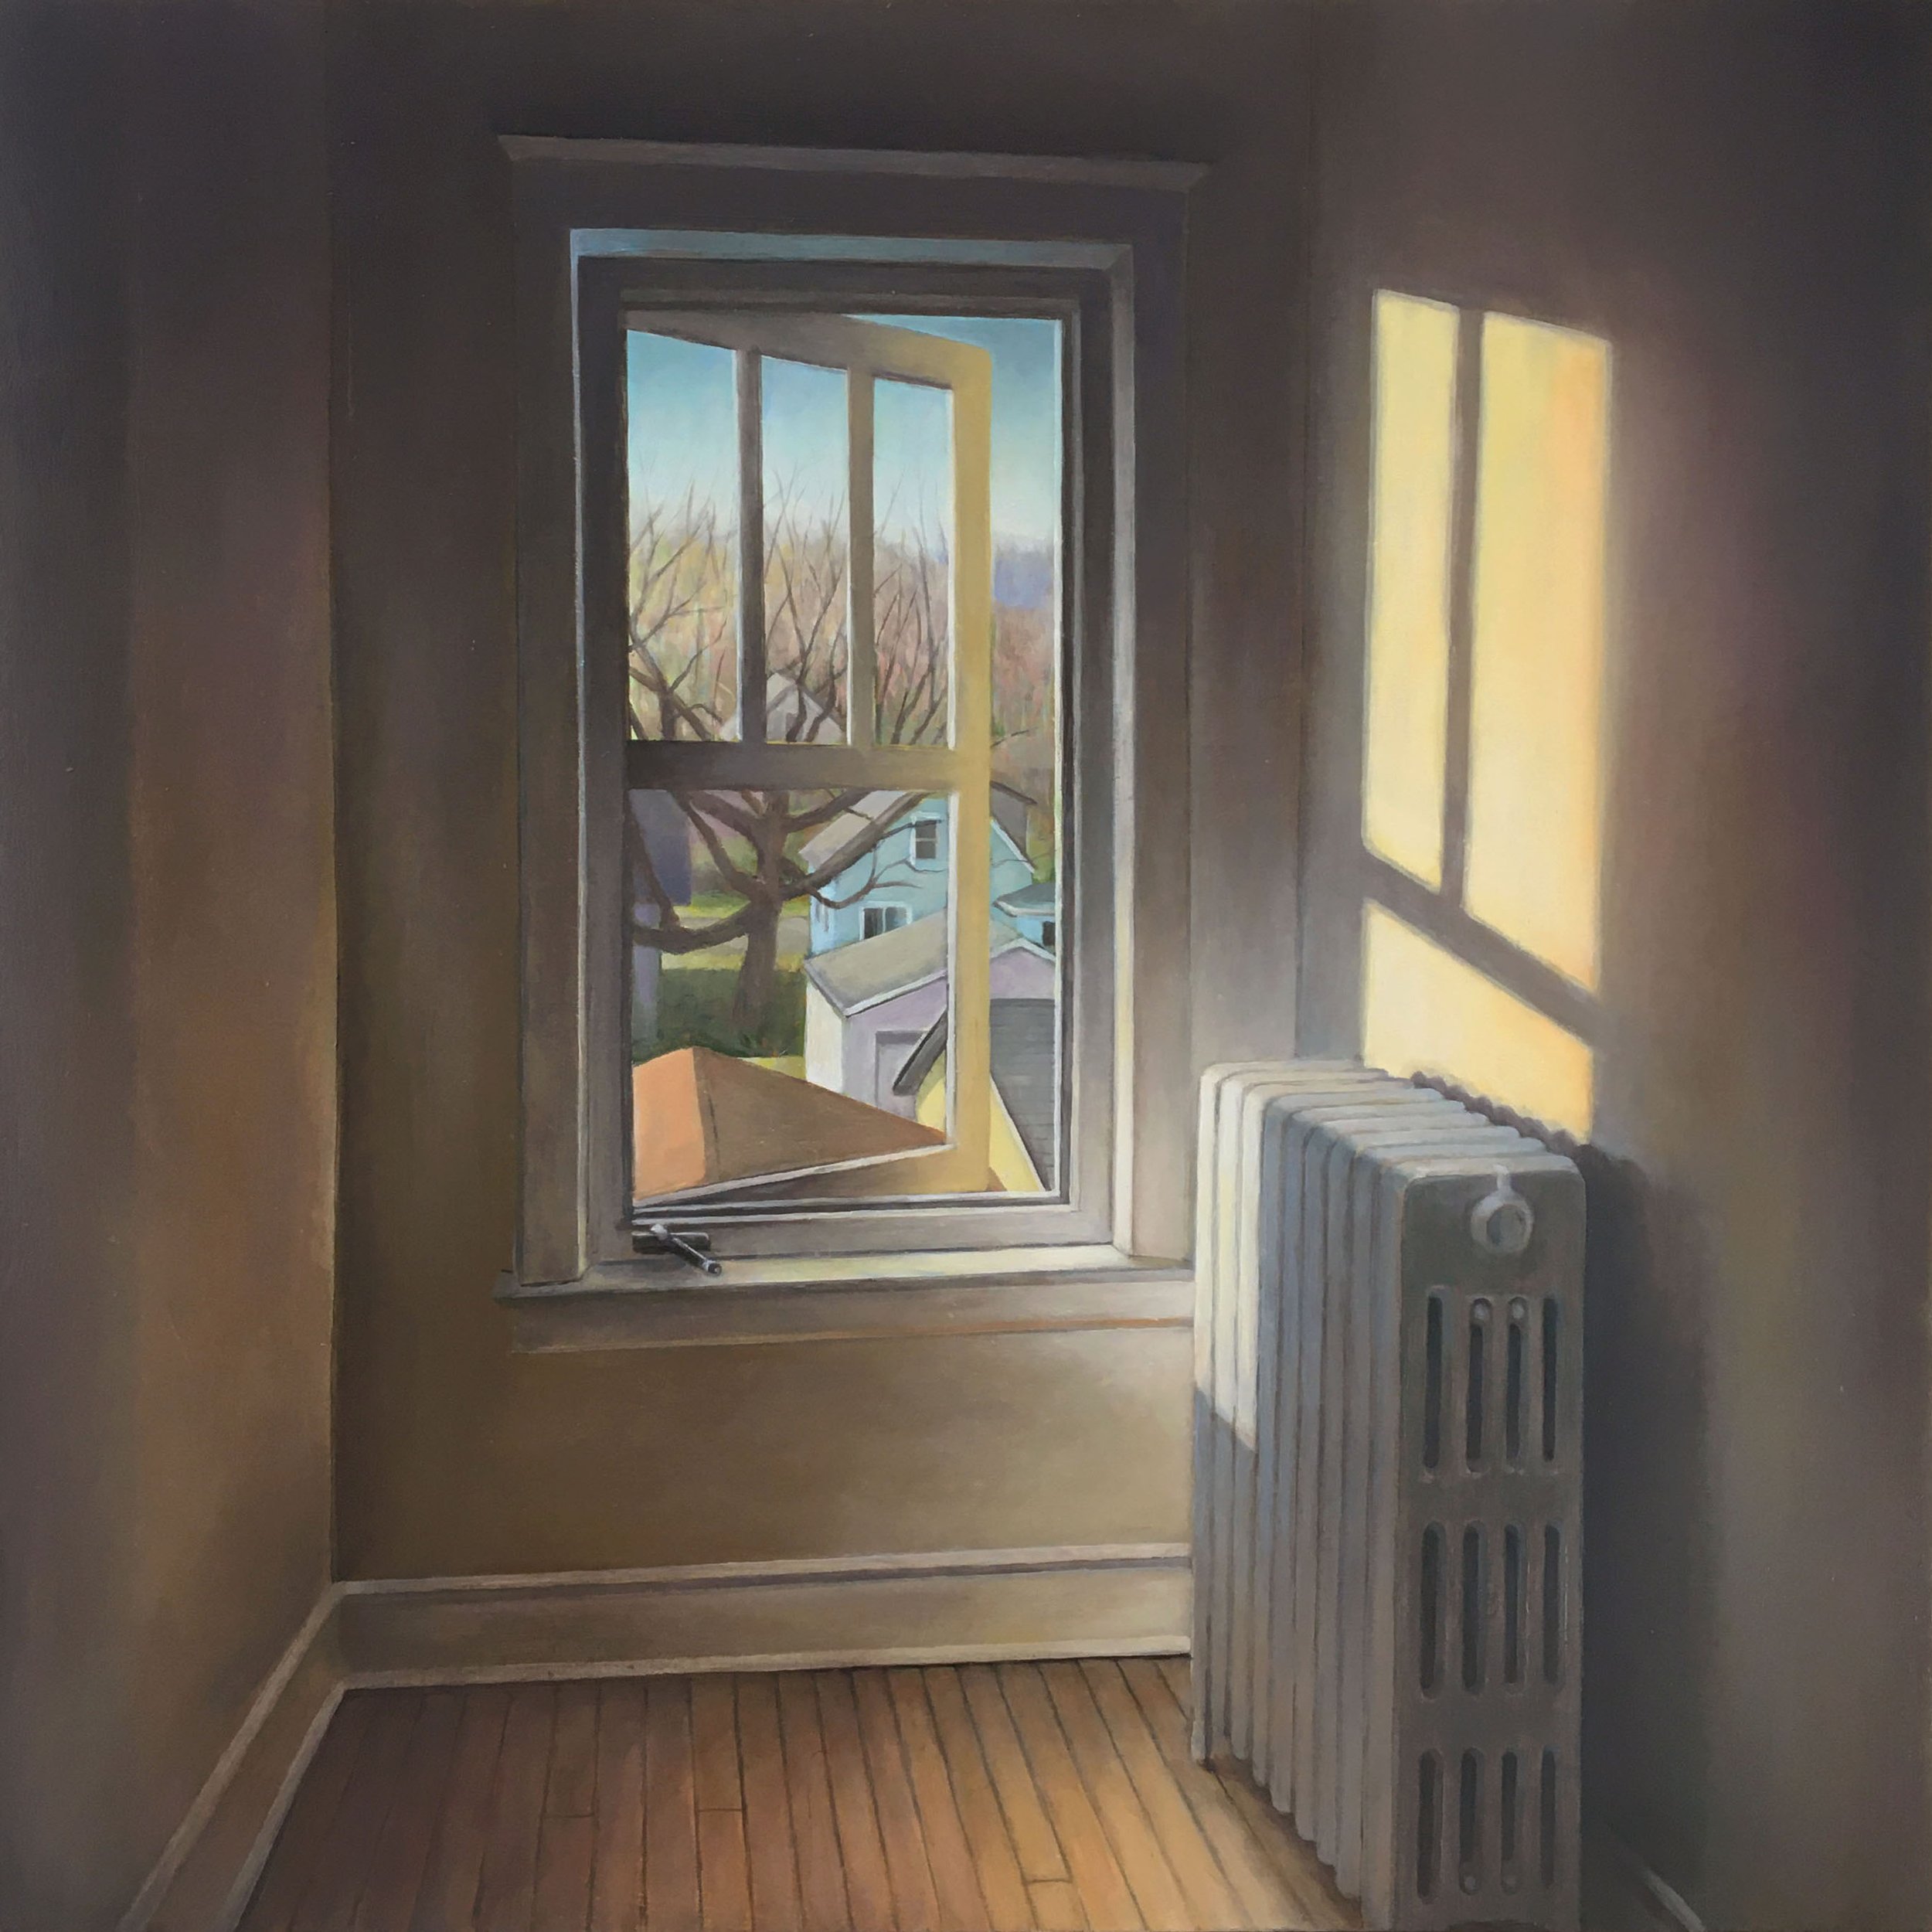   Open Window   2022  Oil on panel  16 x 16 inches   